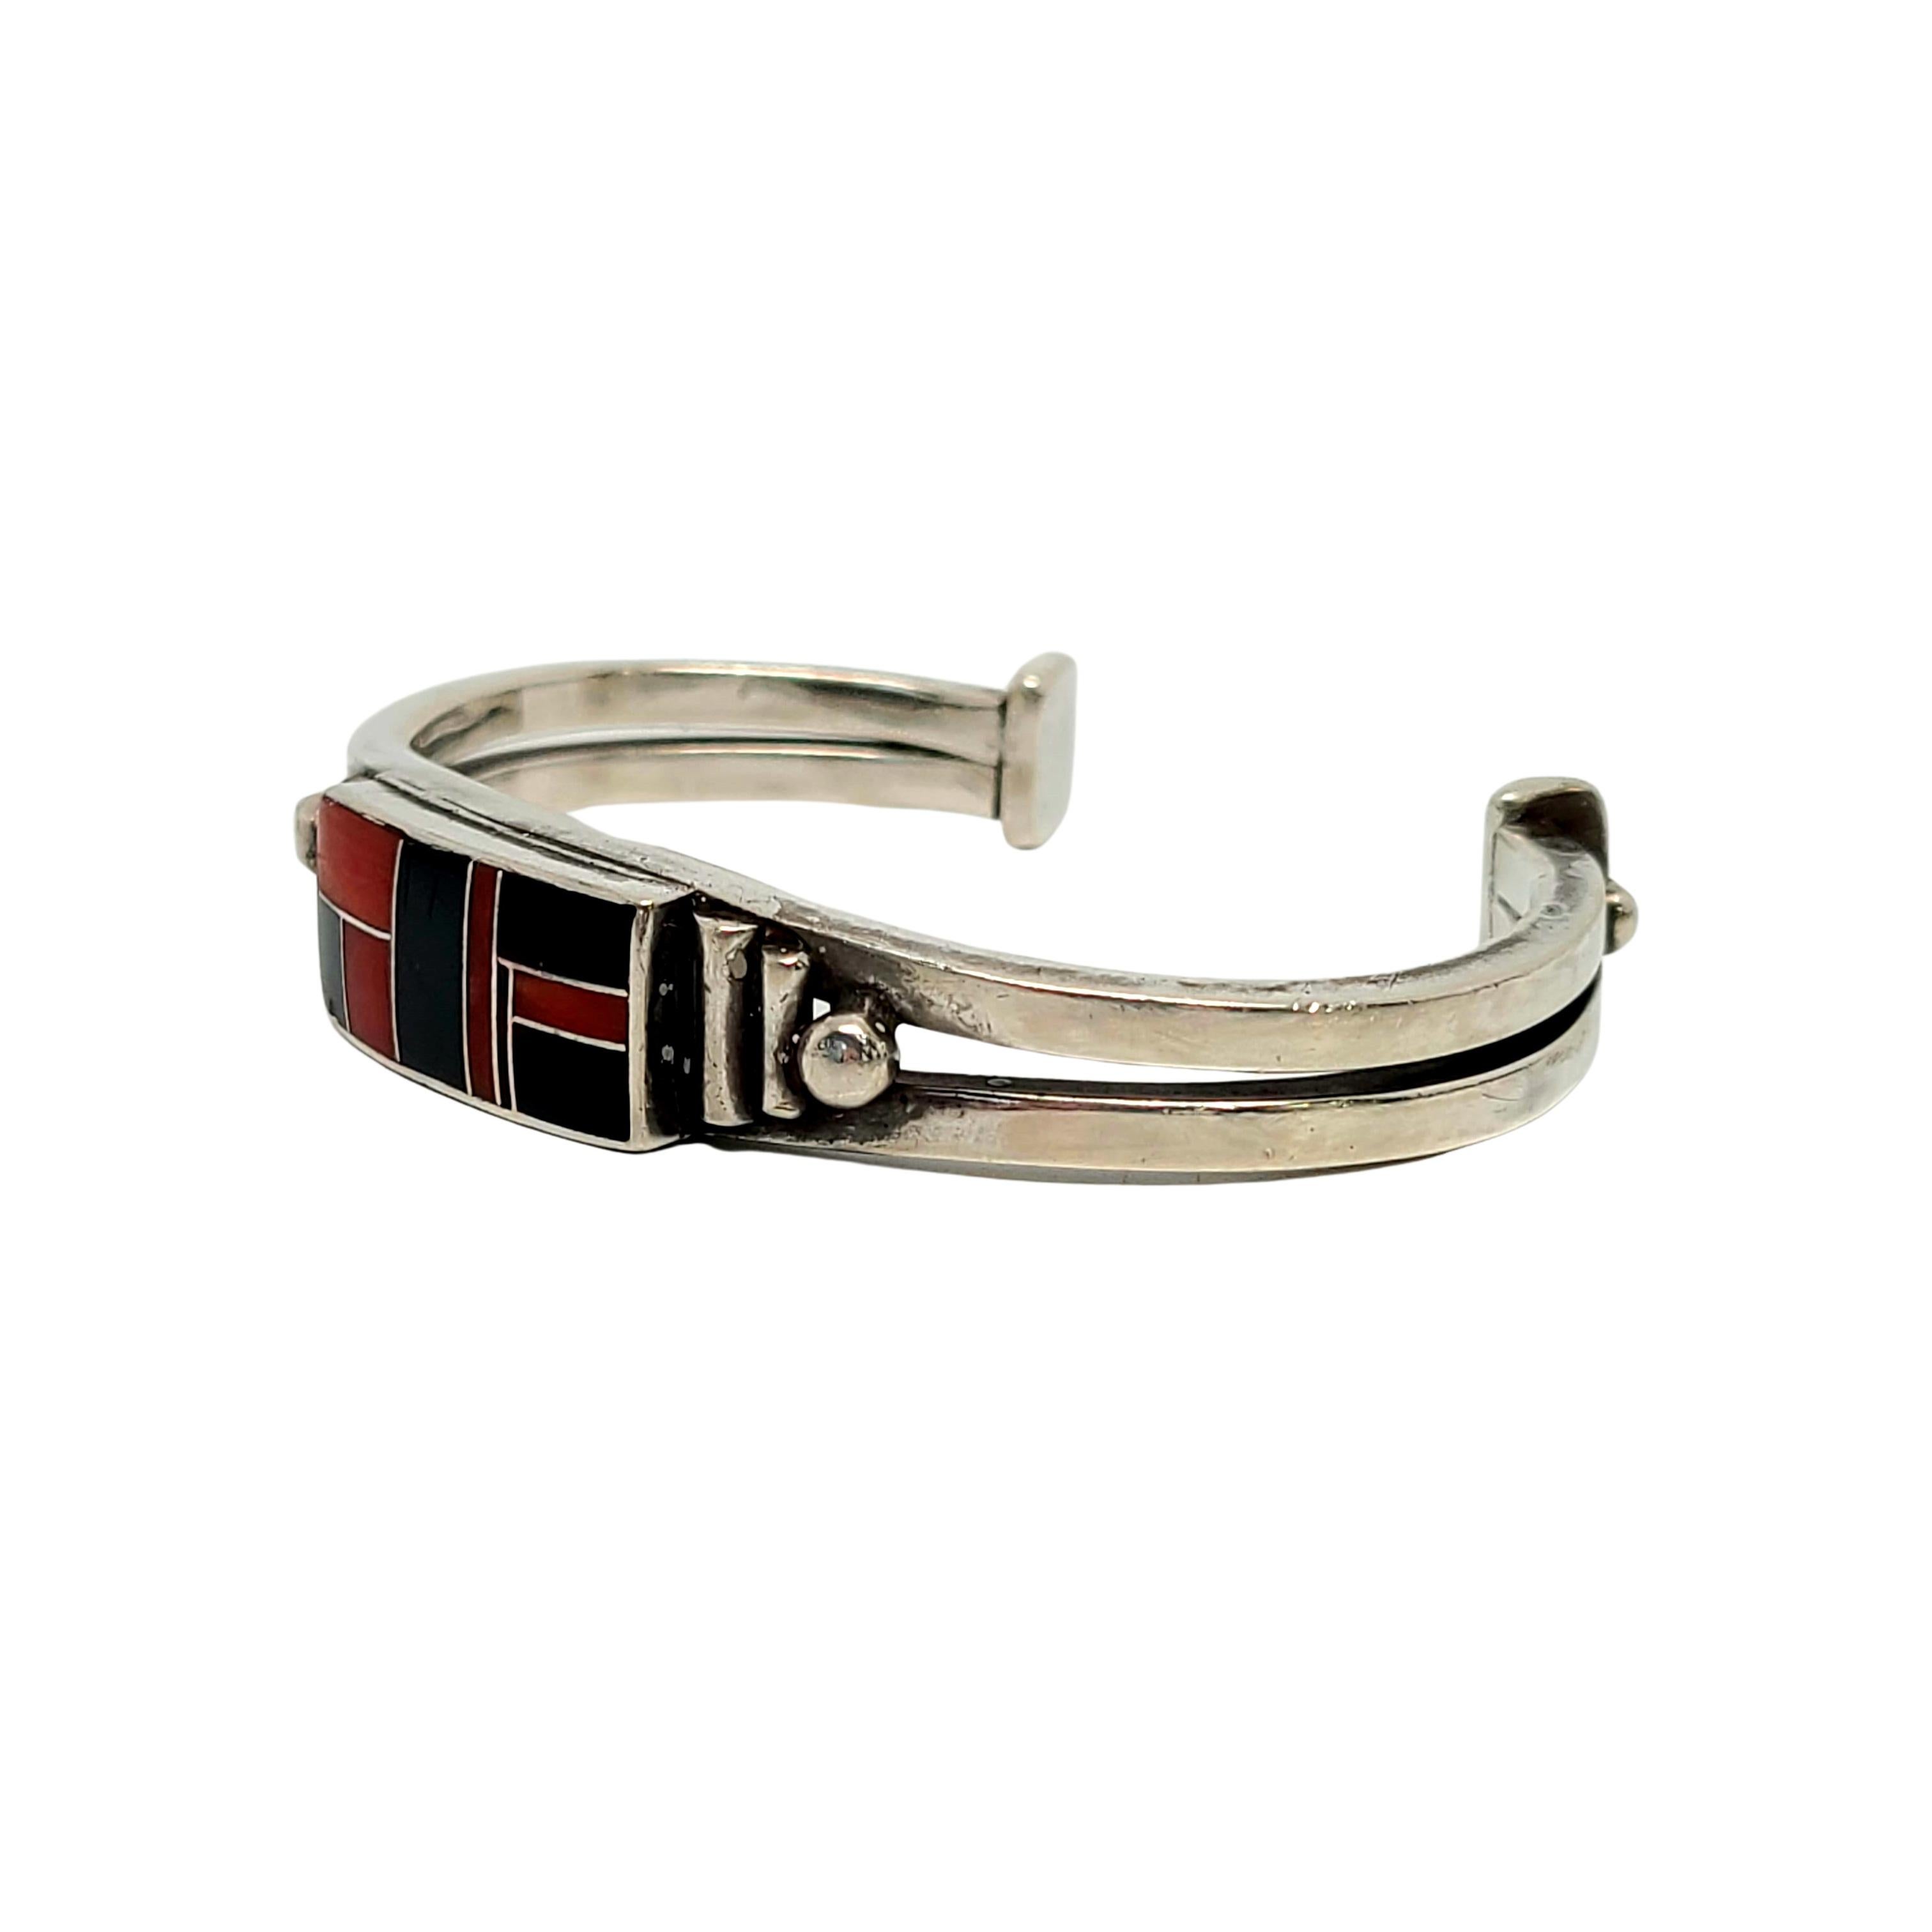 Sterling silver and multi-stone inlay cuff bracelet by Native American Navajo artisans, Ray Tracey and Knifewing Seguara.

Beautiful channel inlay mosaic of what appears to be onyx and coral stones. A collaboration of well known contemporary Navajo